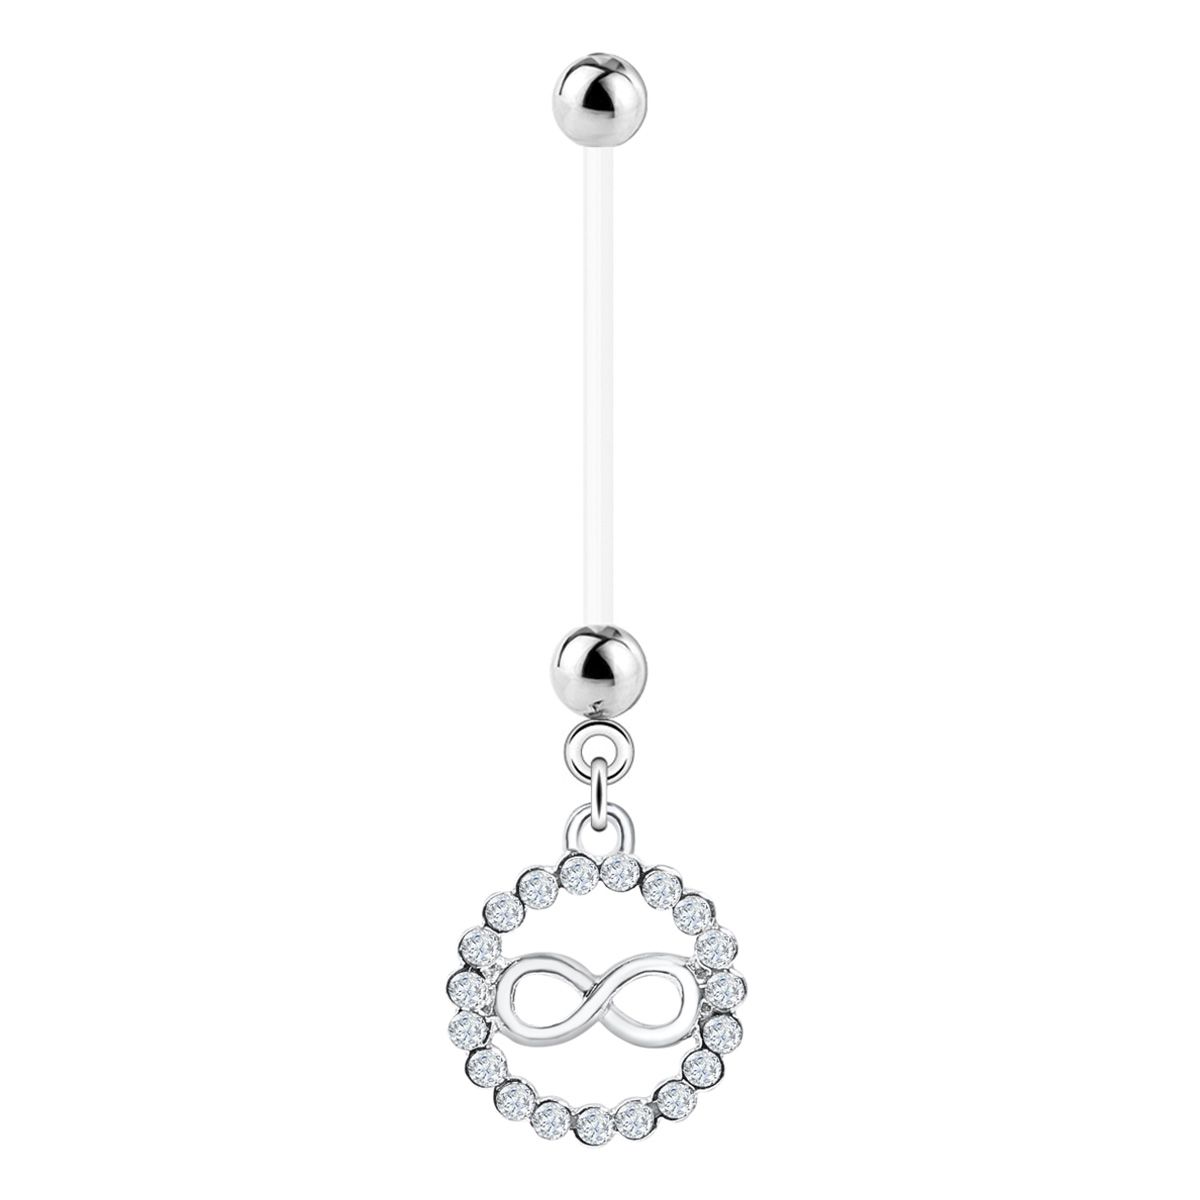 Pregnancy belly button ring with infinity sign dangle